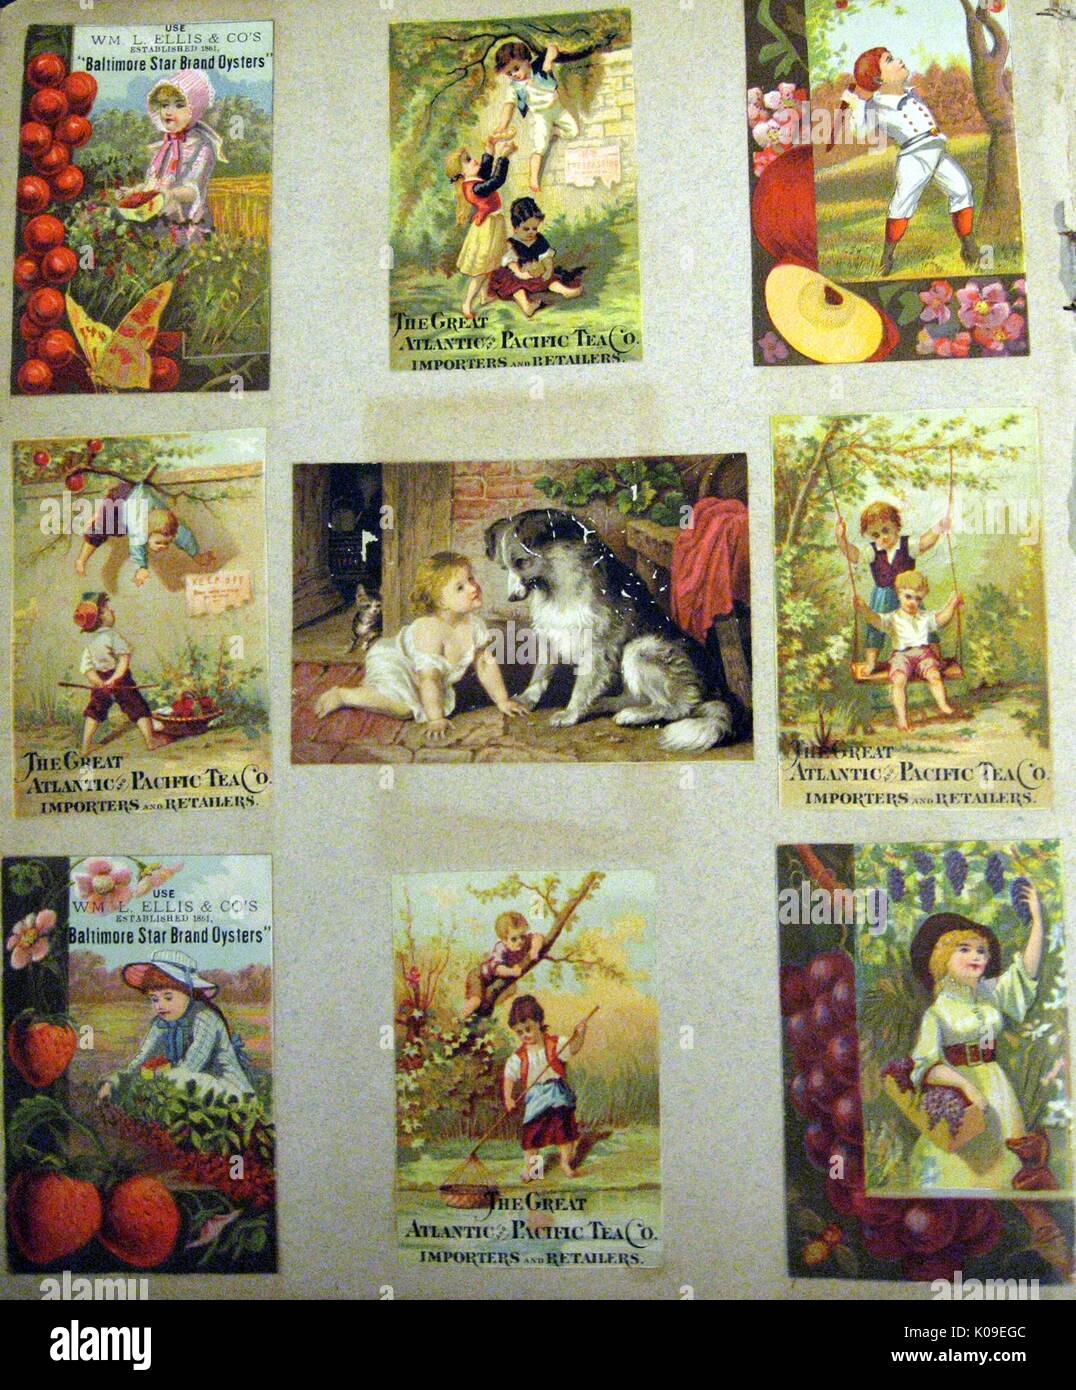 Cards for 'The Great Atlantic Pacific Tea Co.' containing images of children performing various activities from picking strawberries and grapes to swinging on a tree, 1900. Stock Photo